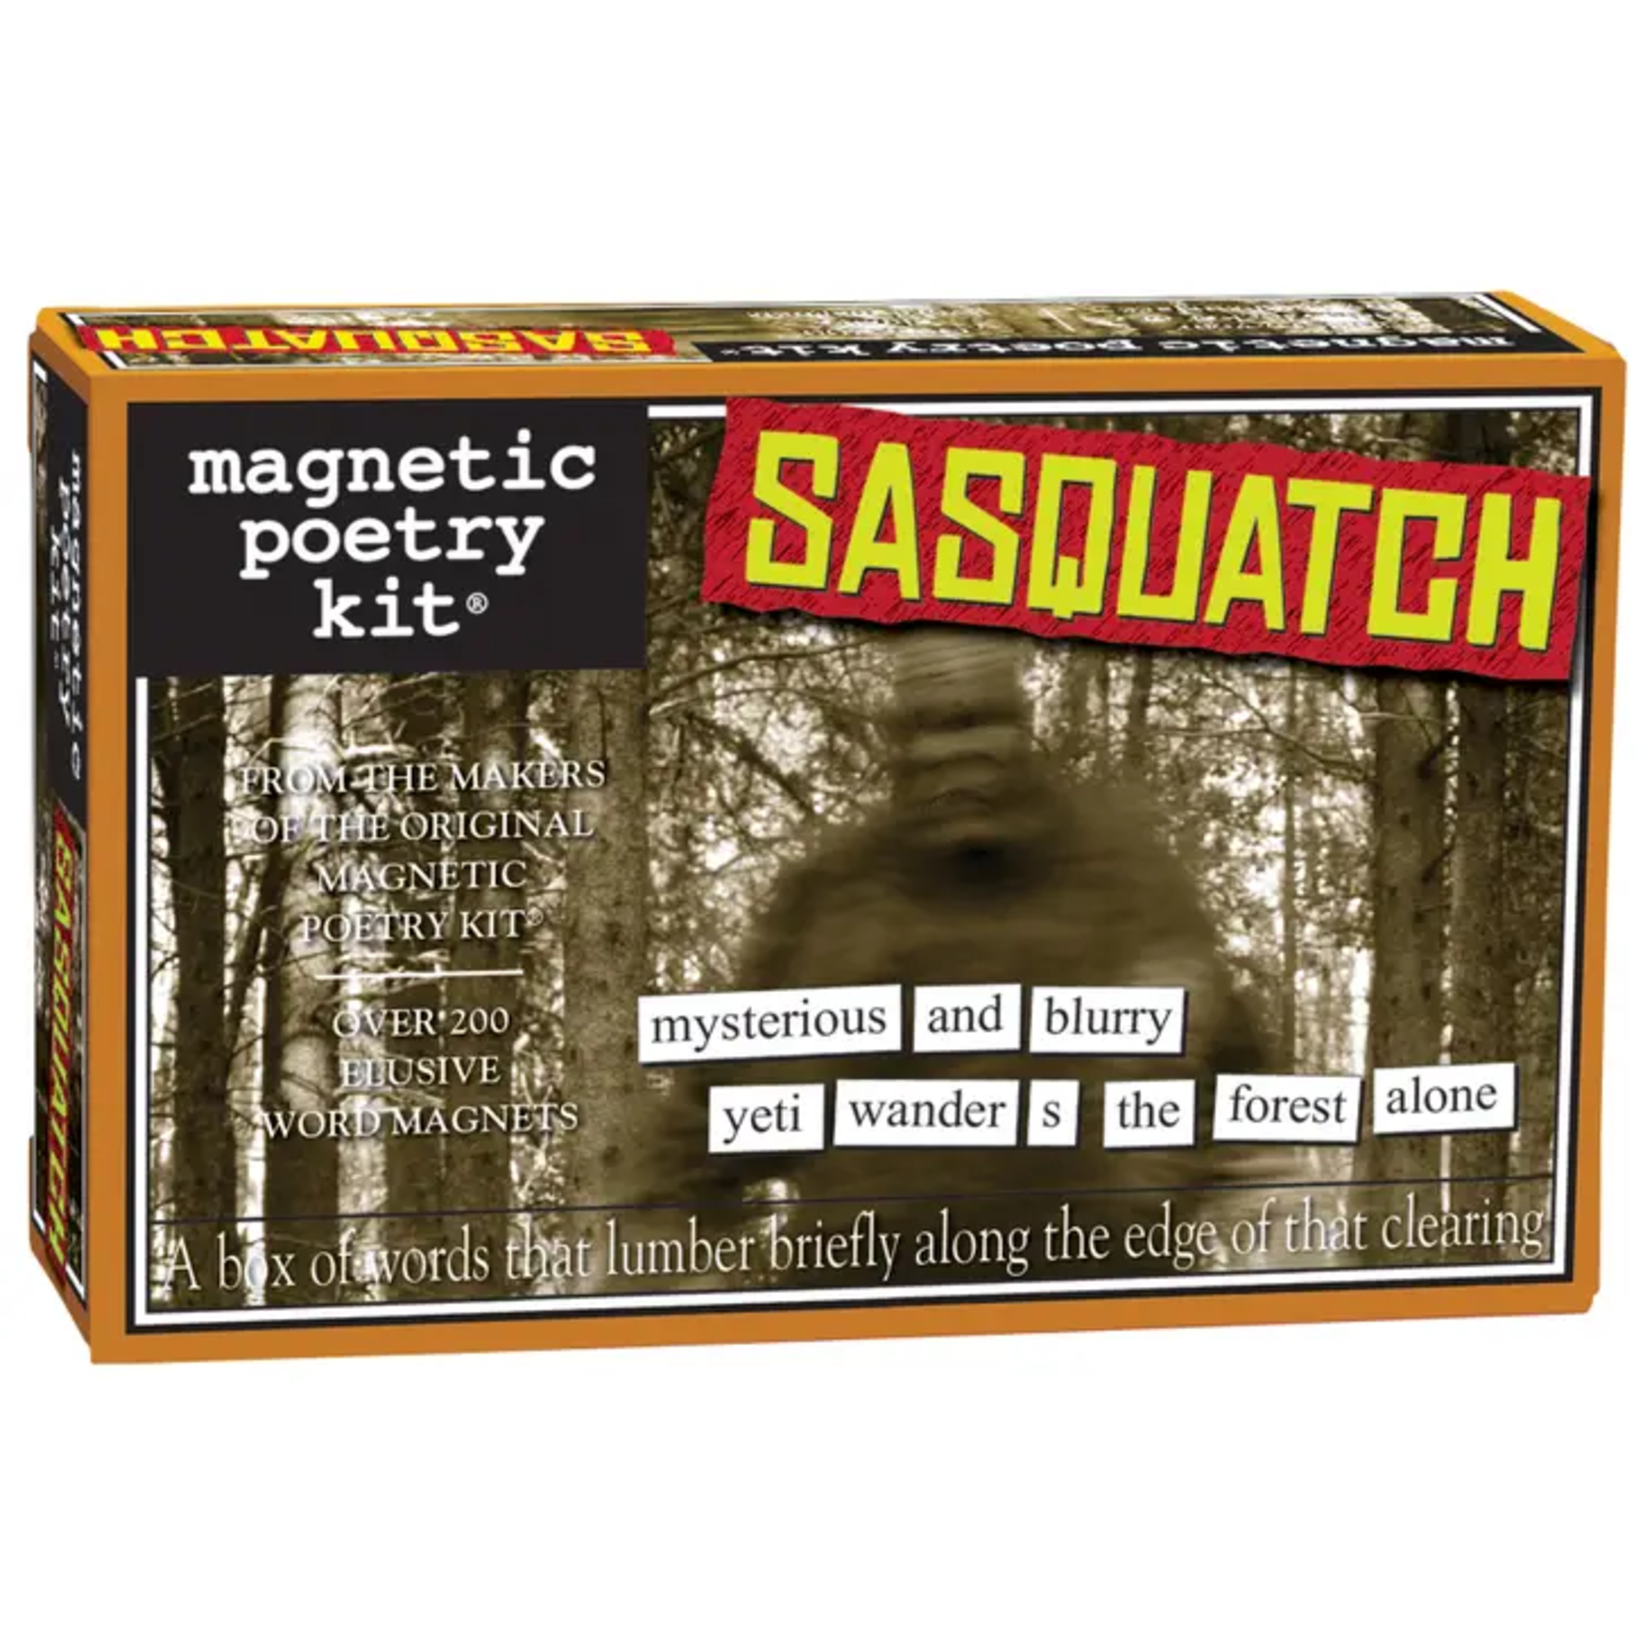 Magnetic Poetry Sasquatch Magnets